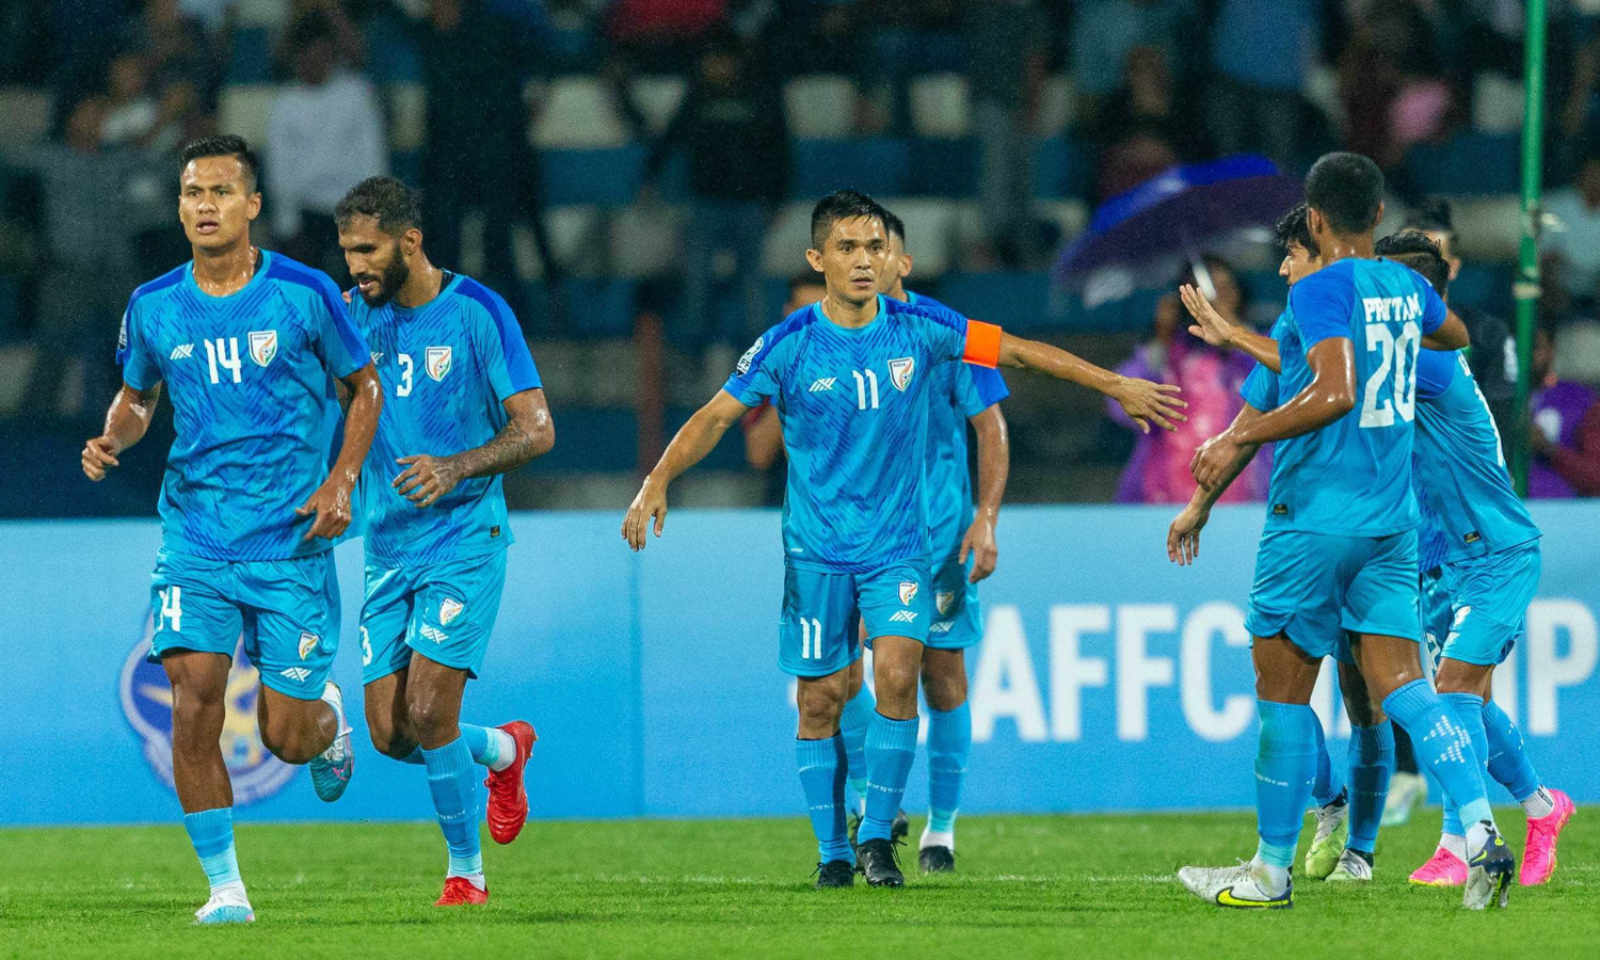 India vs Kuwait, SAFF Championship IND 1-1 KUW at Full Time — Highlights